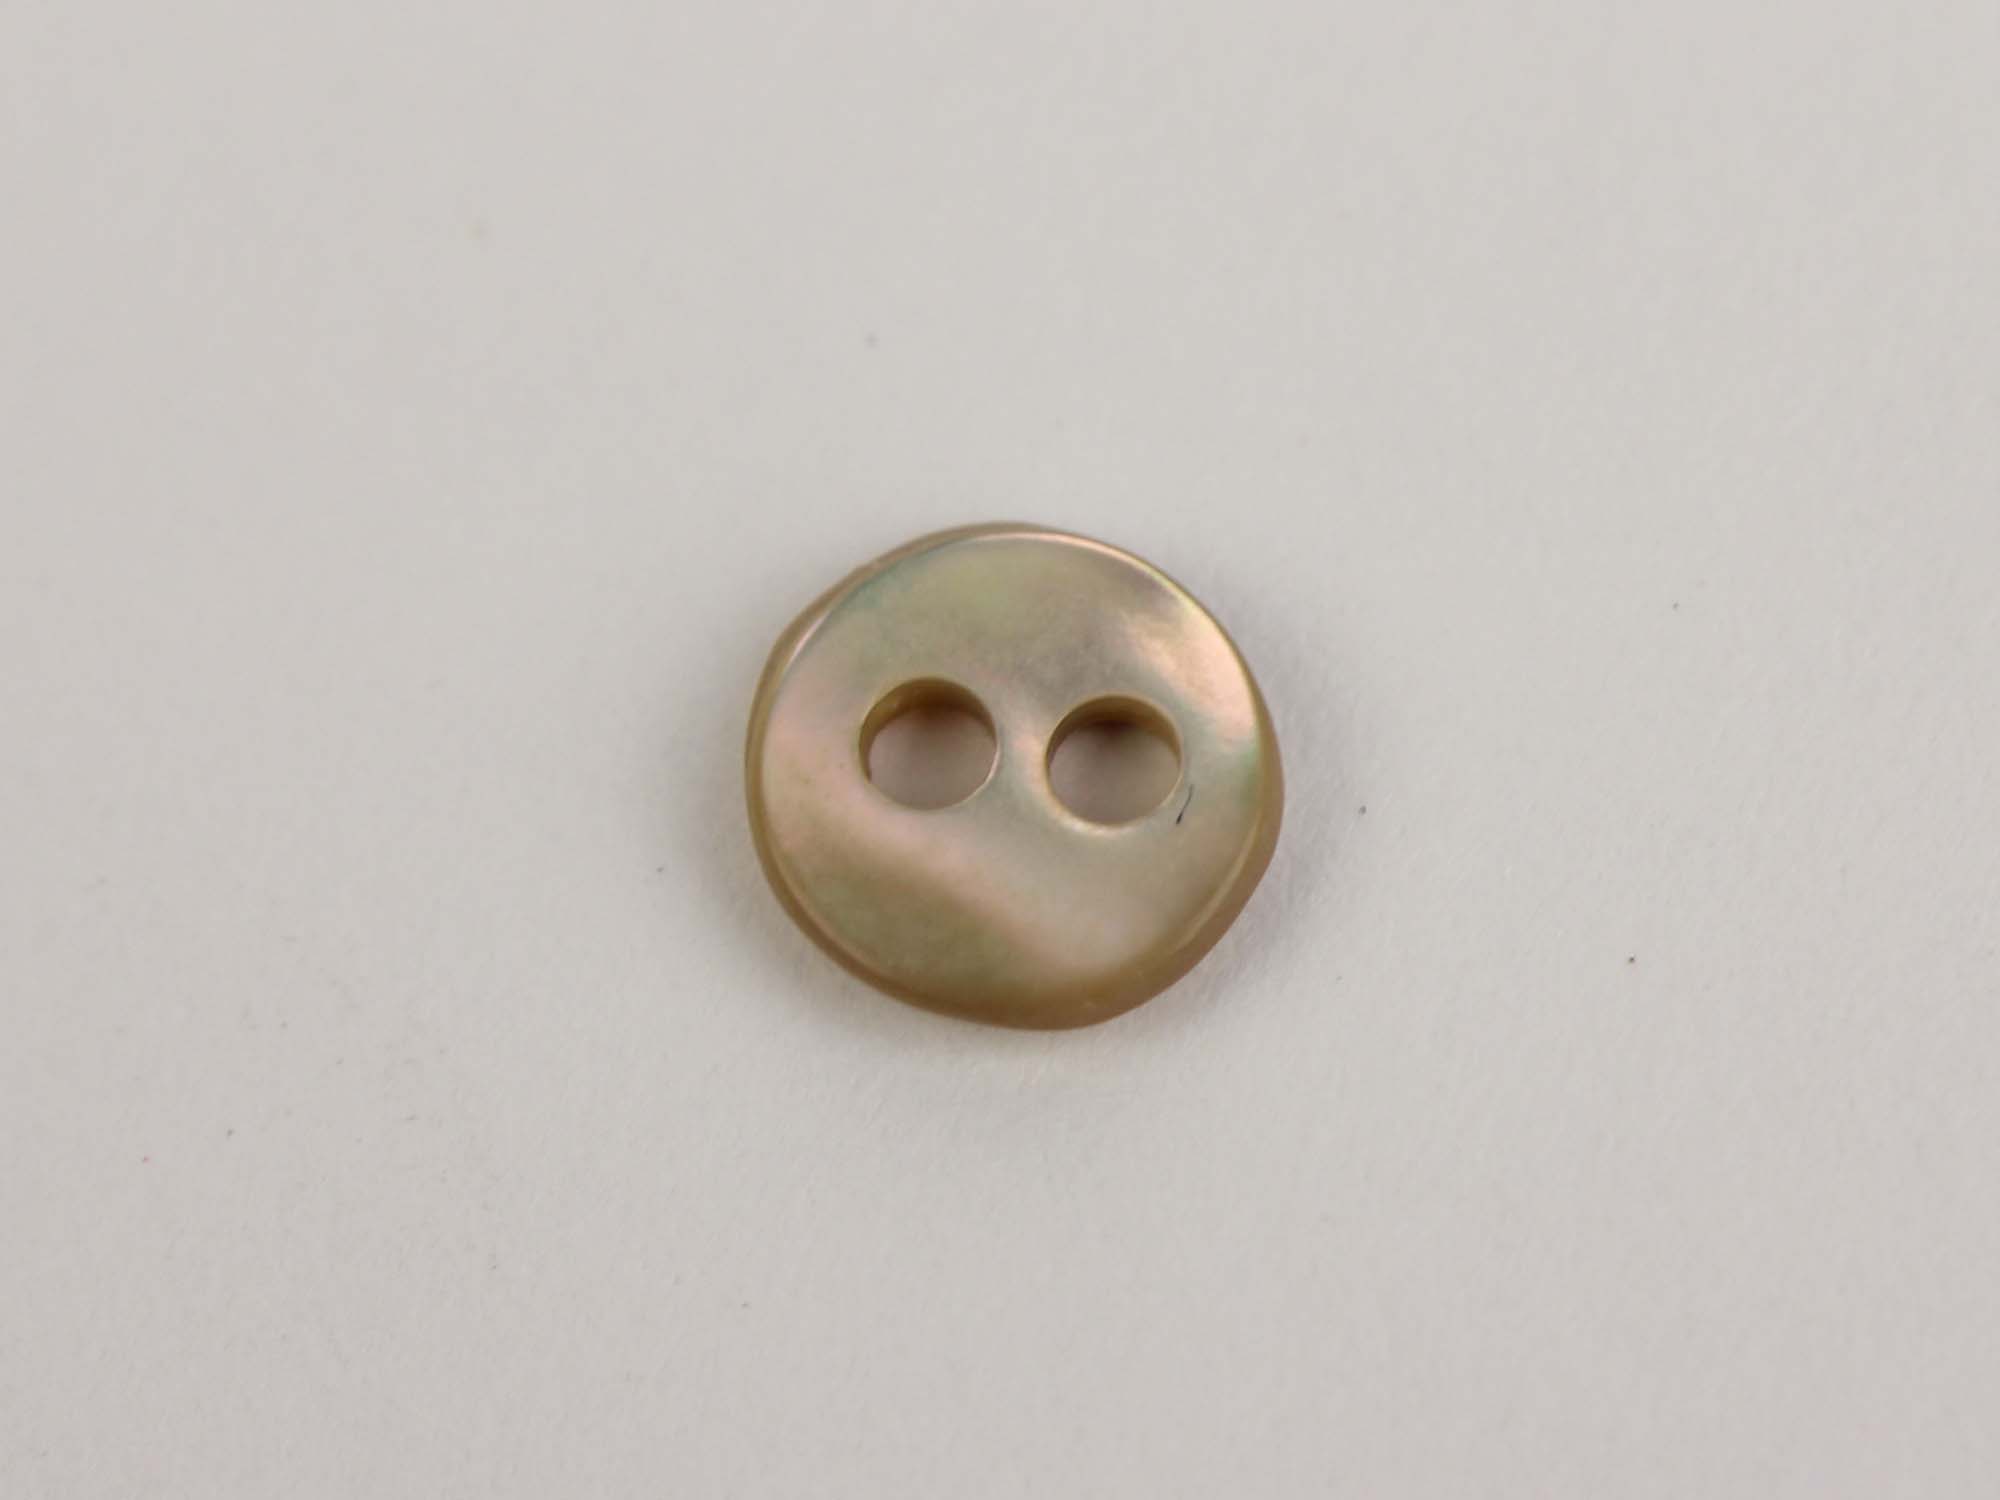 Australian Abalone Button: 10-Line (6.35mm or 0.25") 